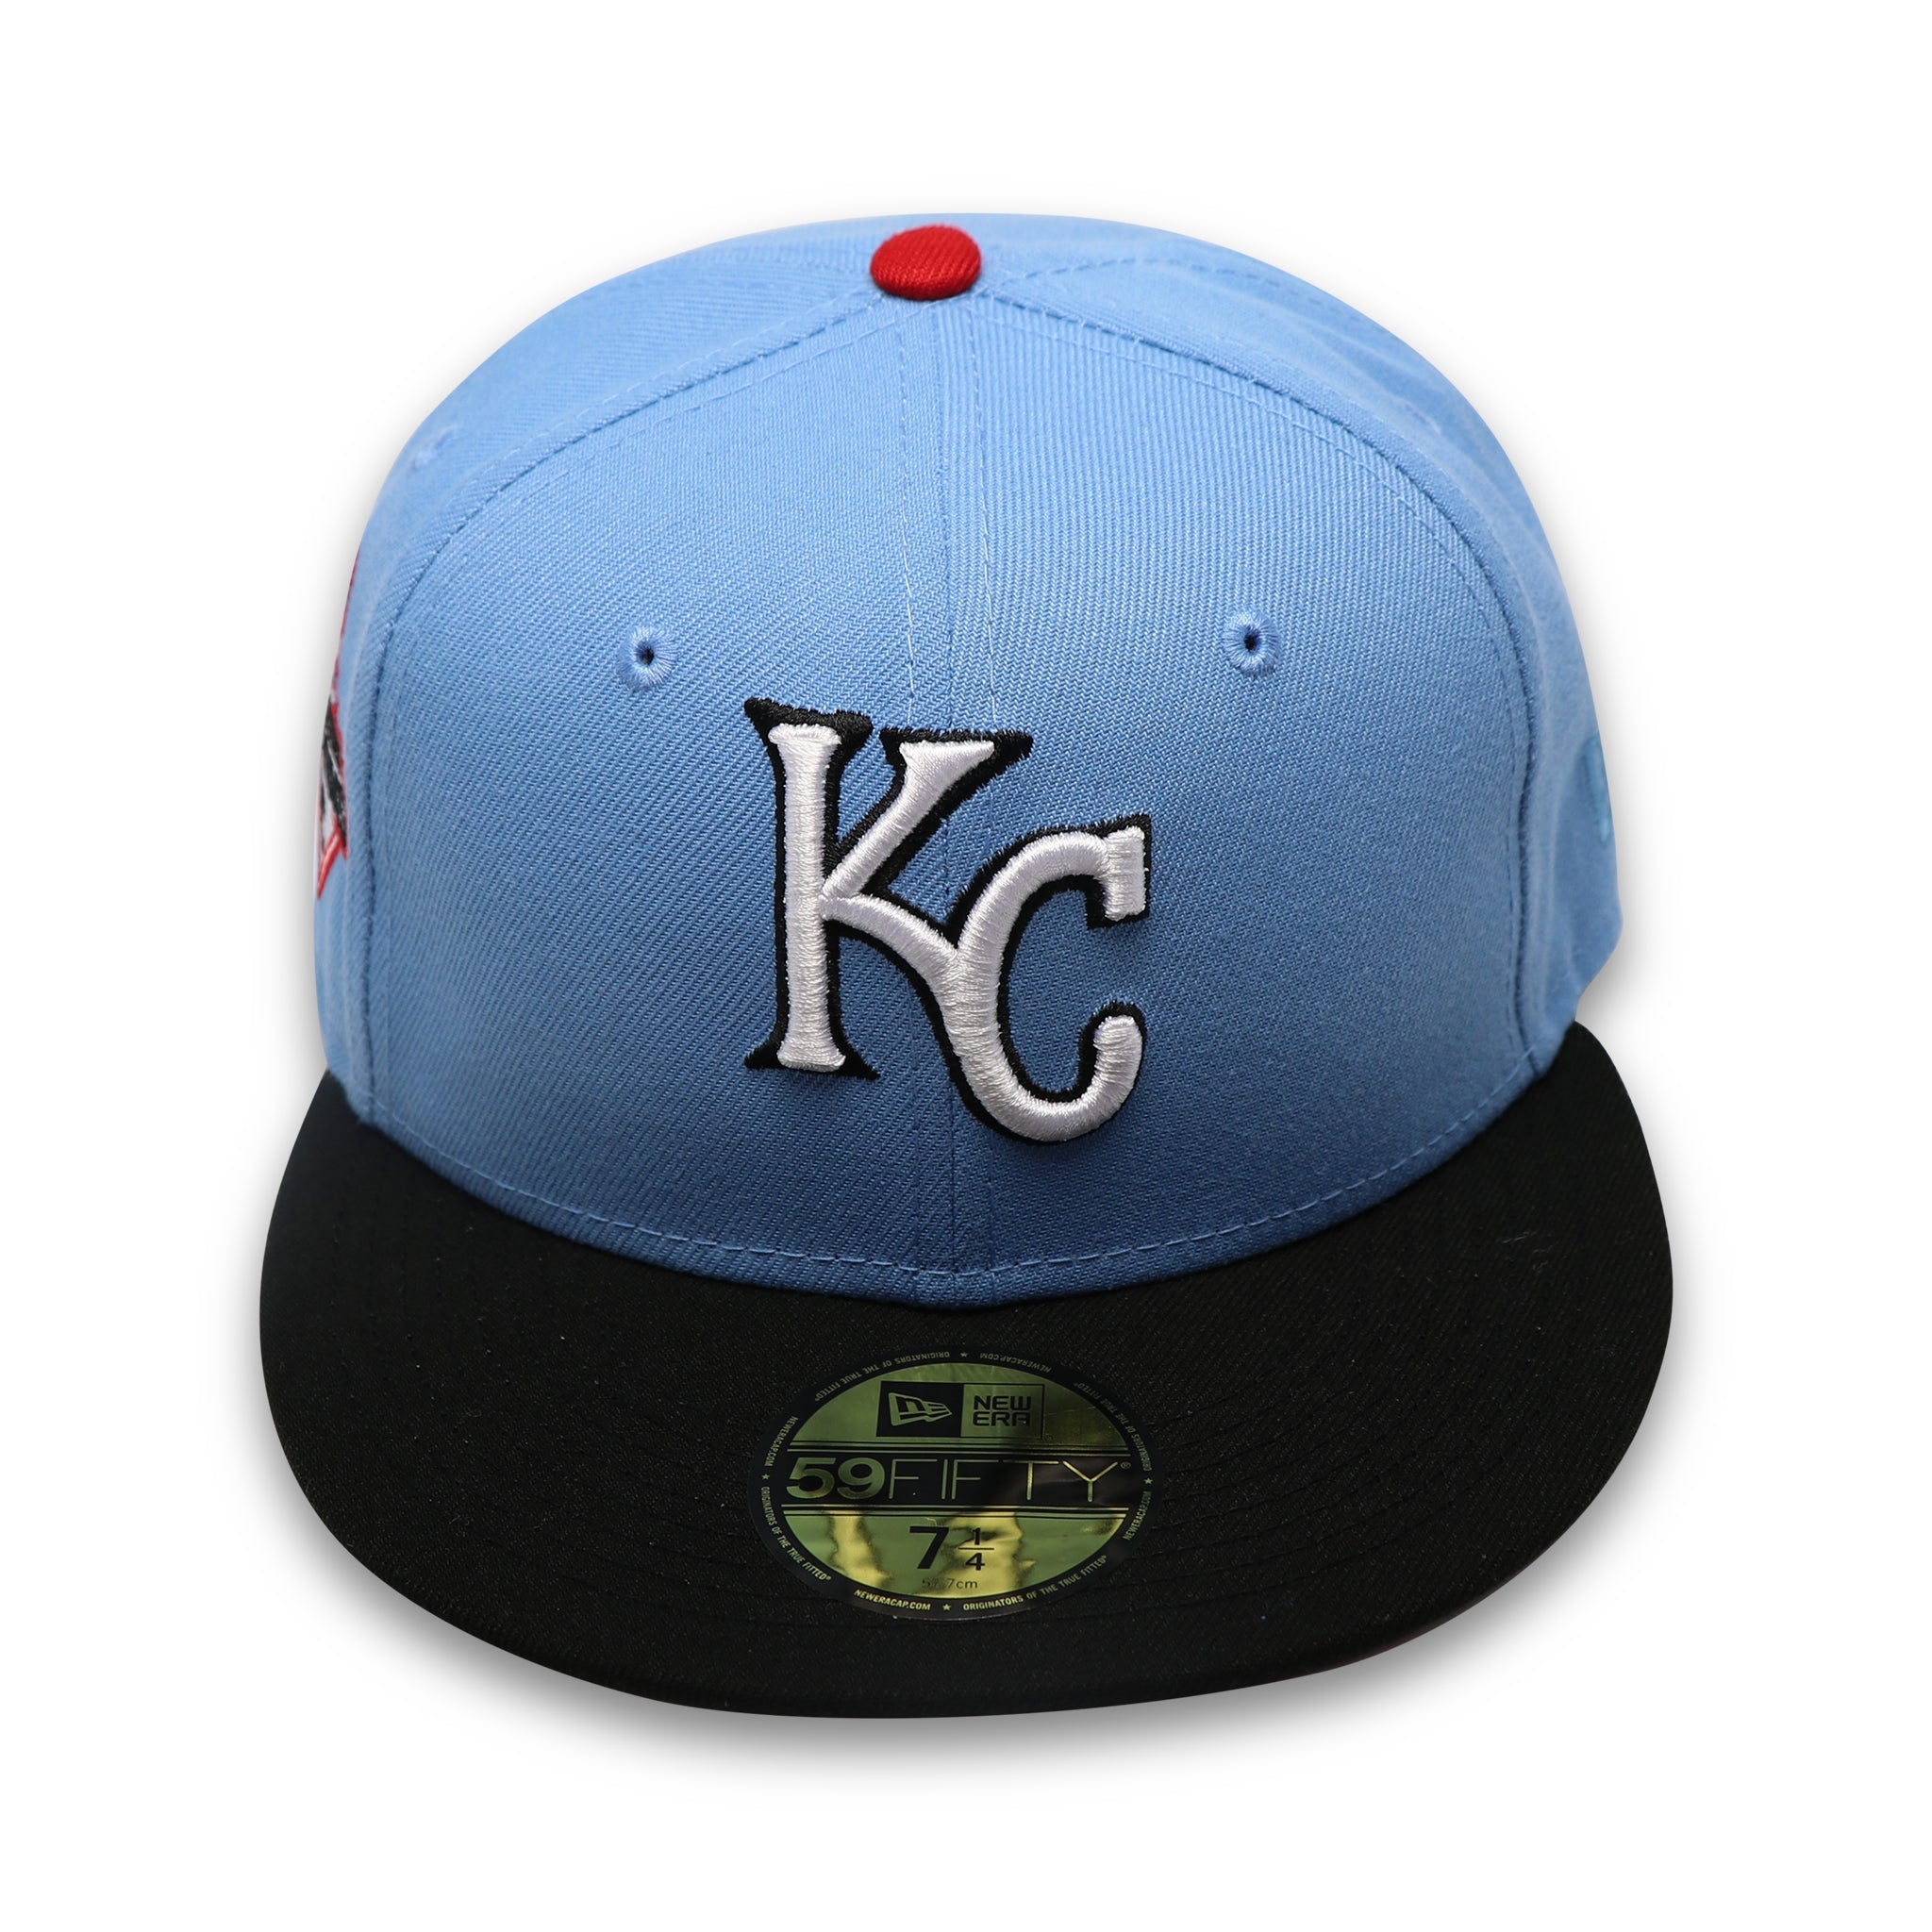 KANSAS CITY ROYALS "2015 CHAMPIONS" NEW ERA 59FIFTY FITTED (CEMENT UNDER VISOR)